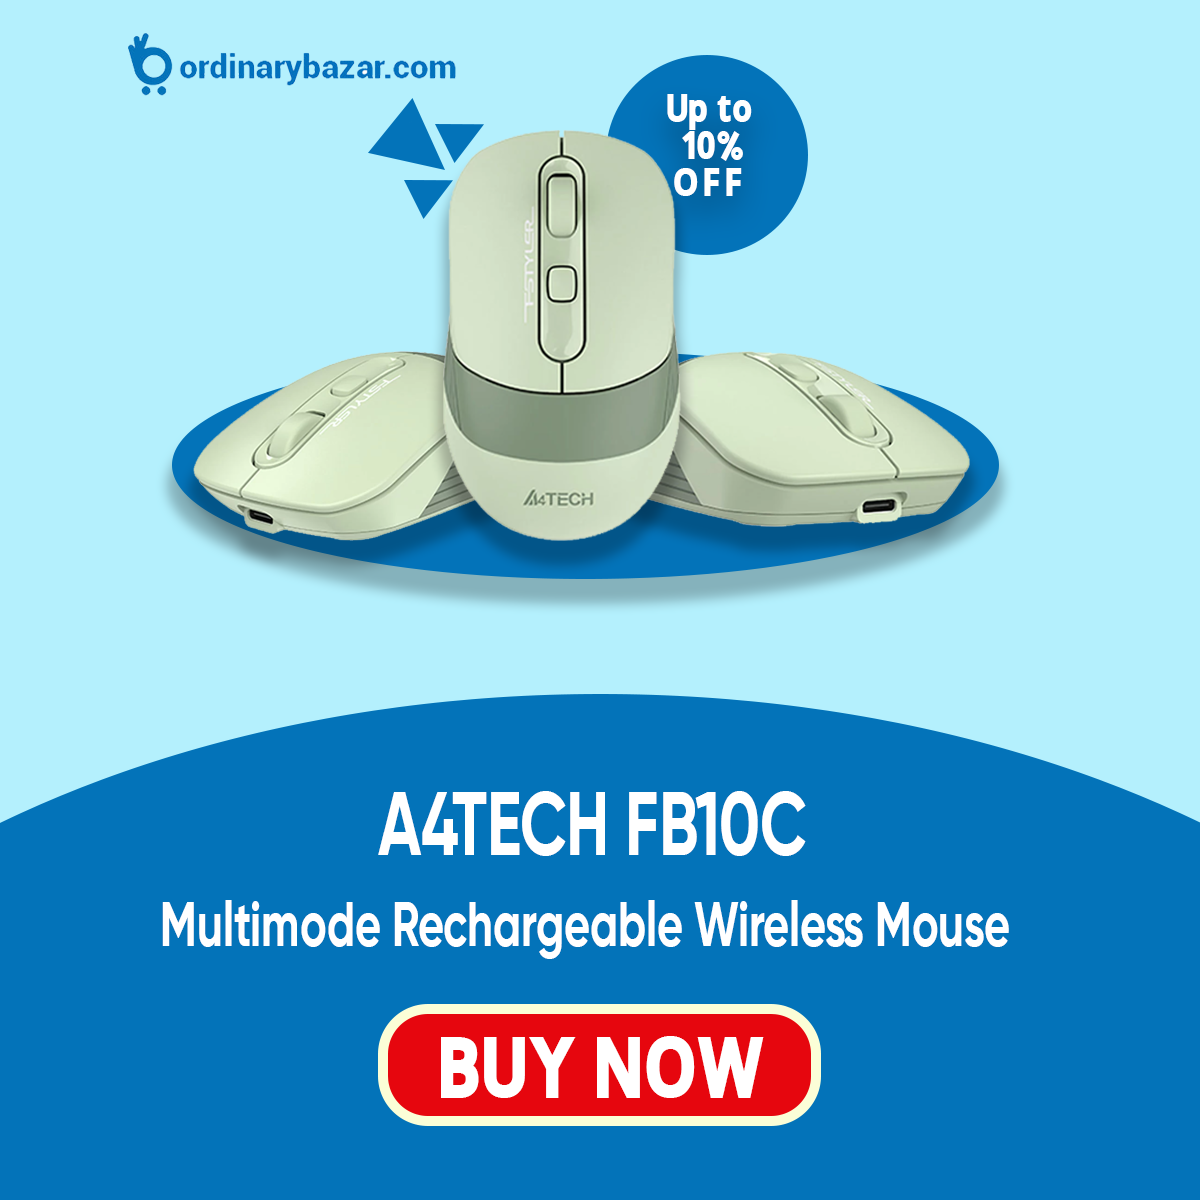 A4TECH FB10C Multimode Rechargeable Wireless Mouse